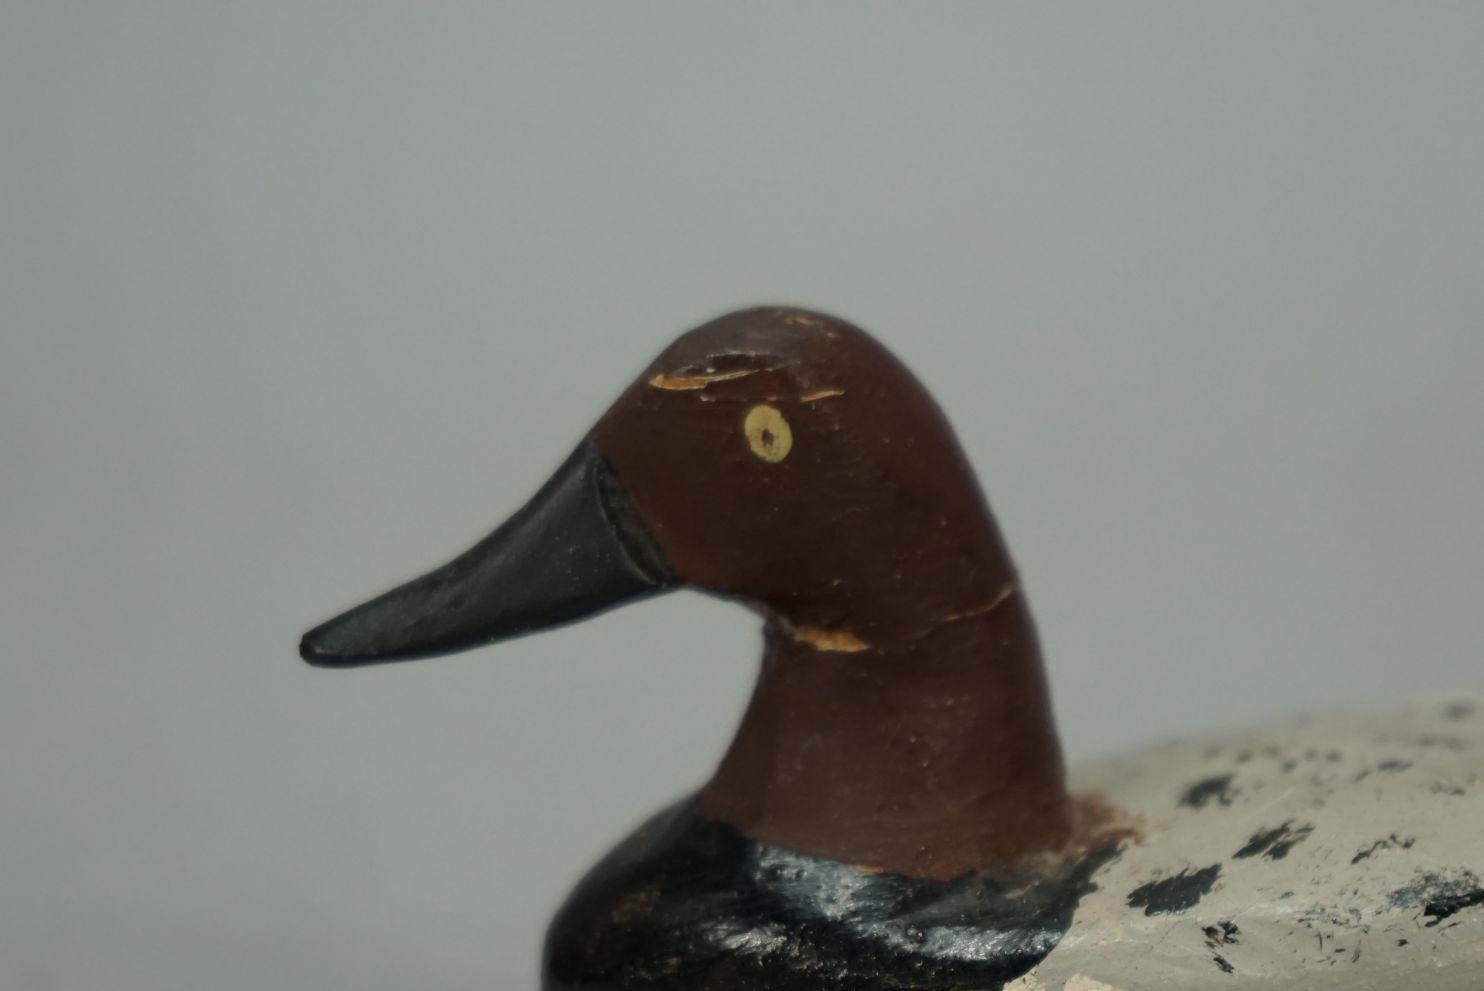 CANVASBACK BY DOUG JESTER